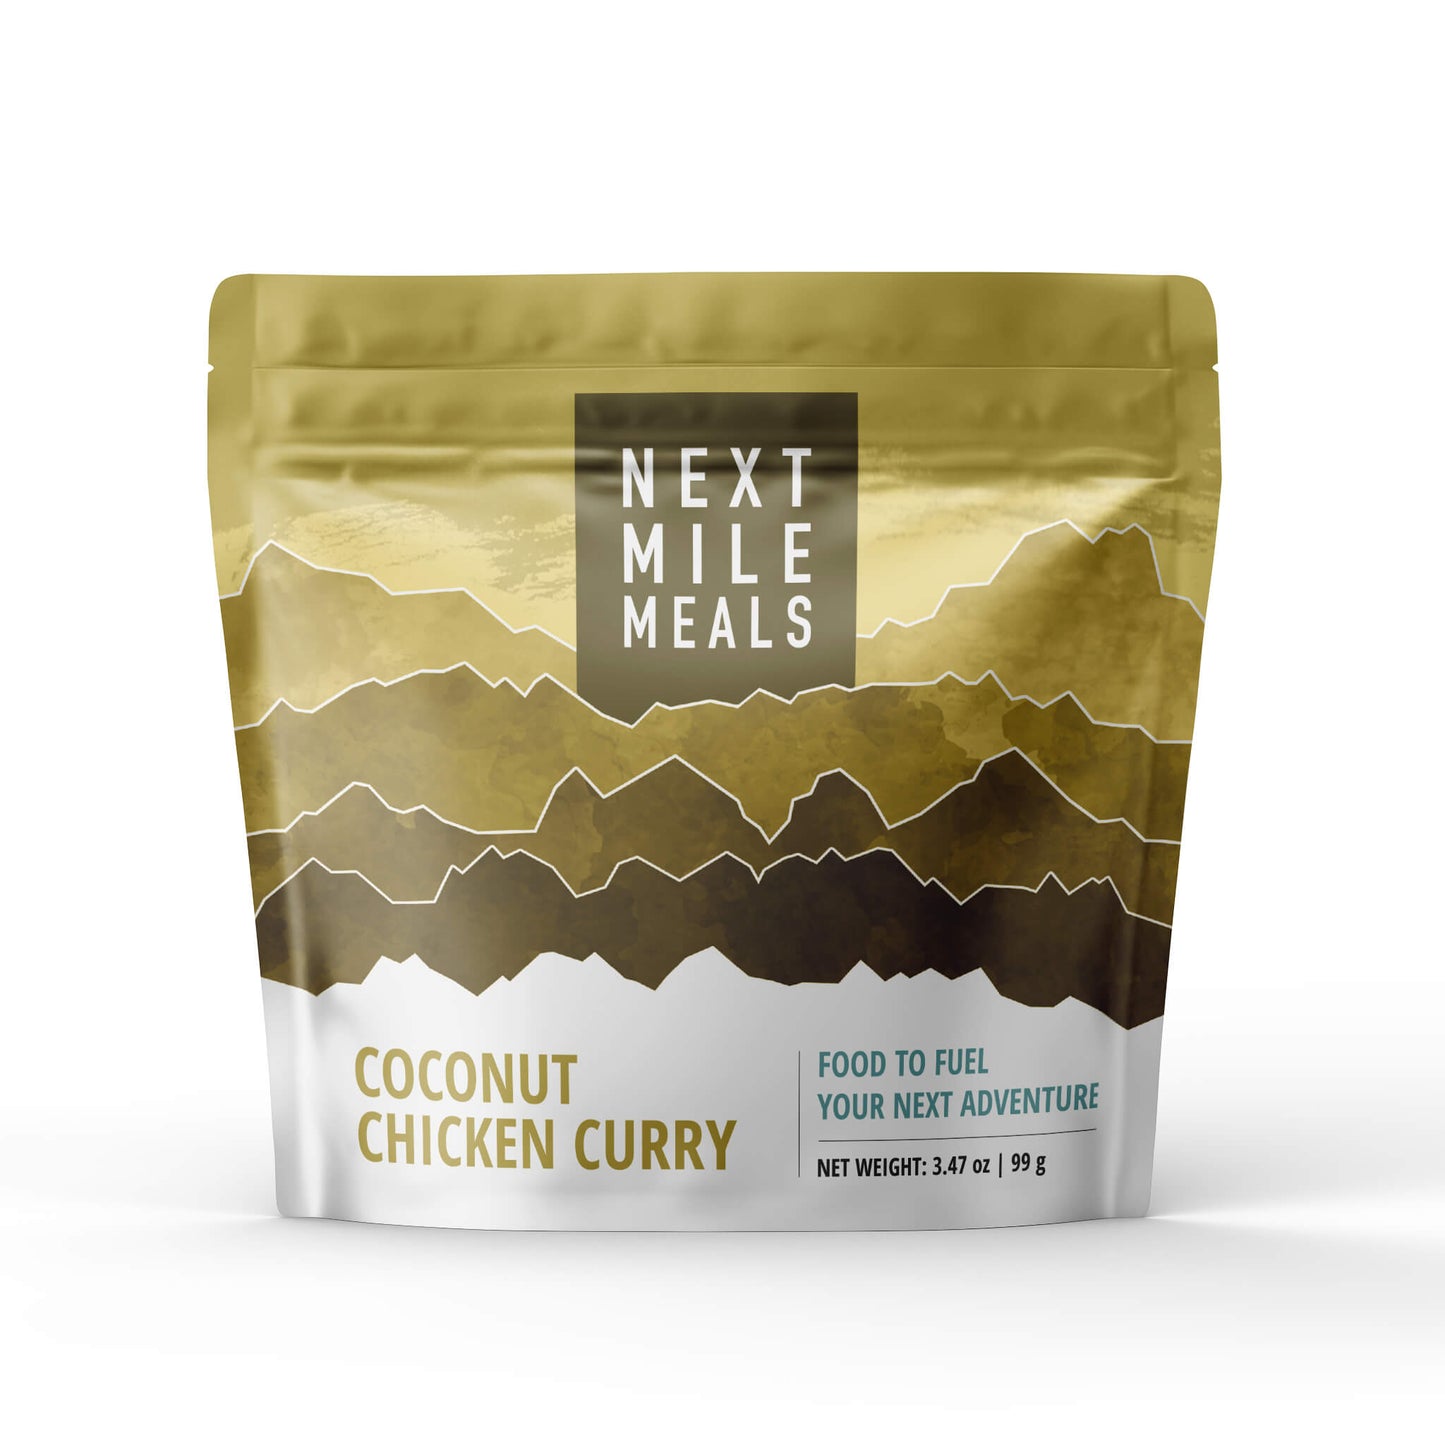 Coconut Chicken Curry - Next Mile Meals